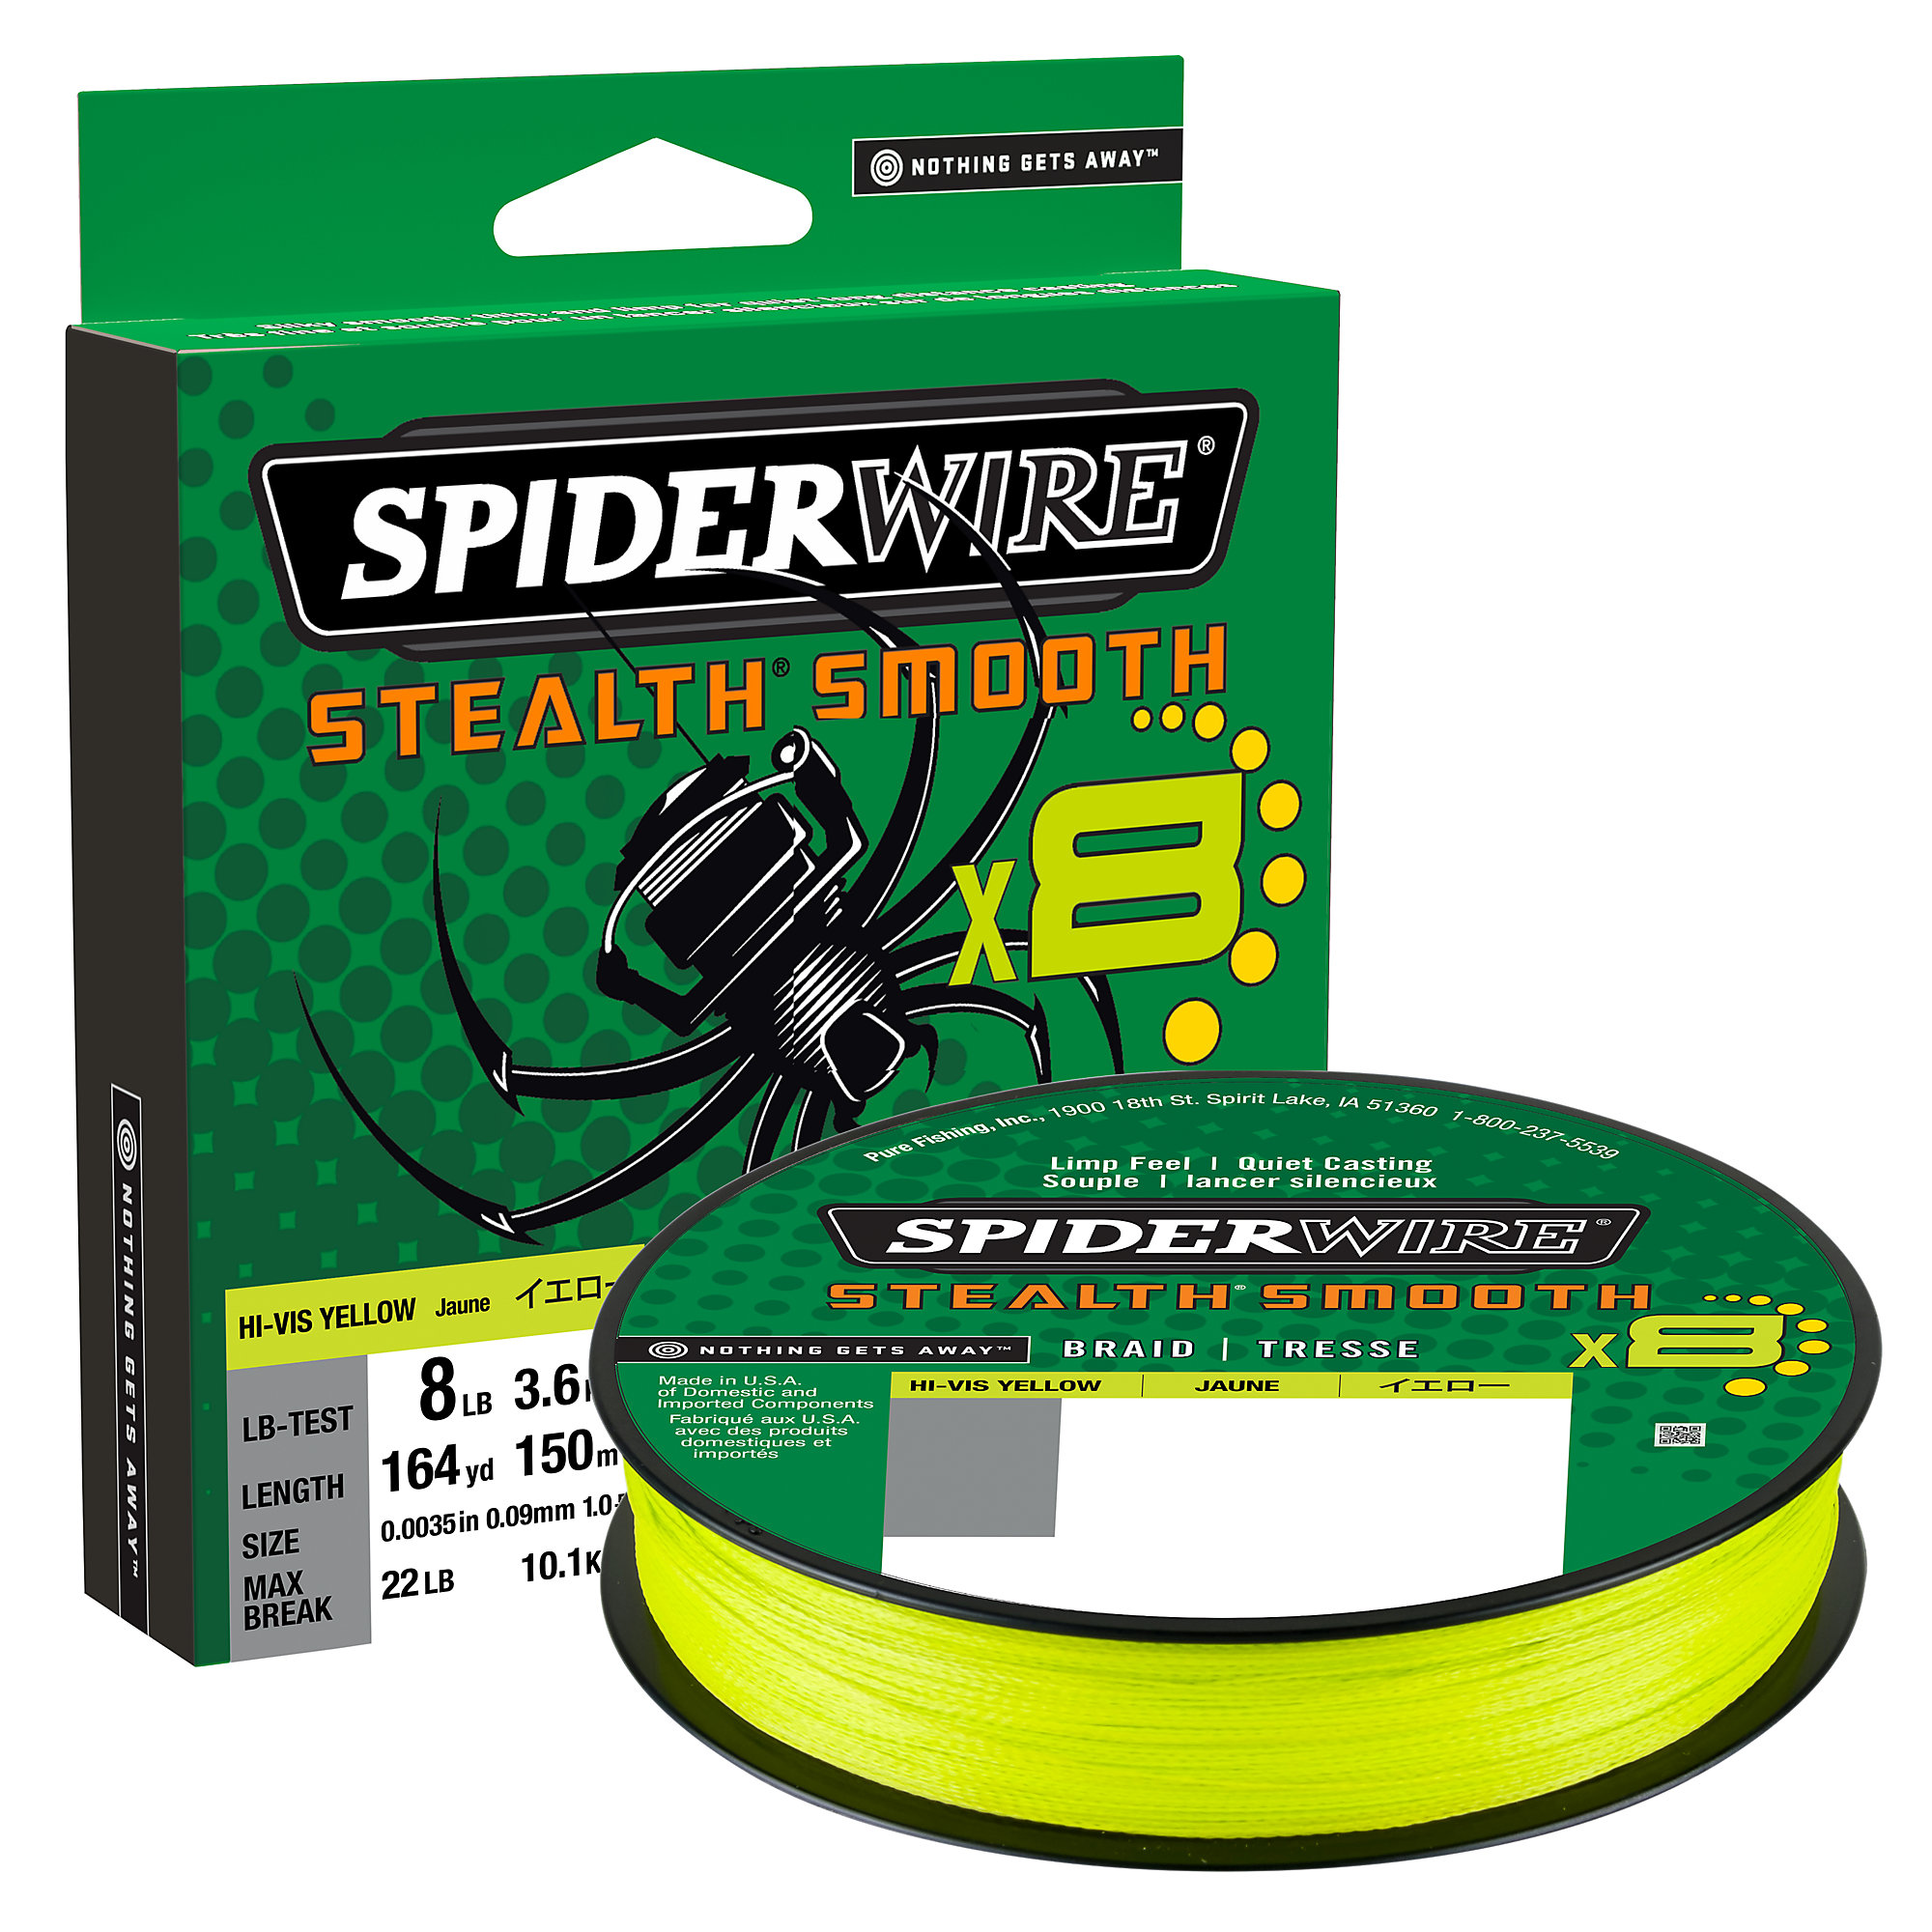 Details about   Spiderwire Stealth Smooth Braid Fishing Line 